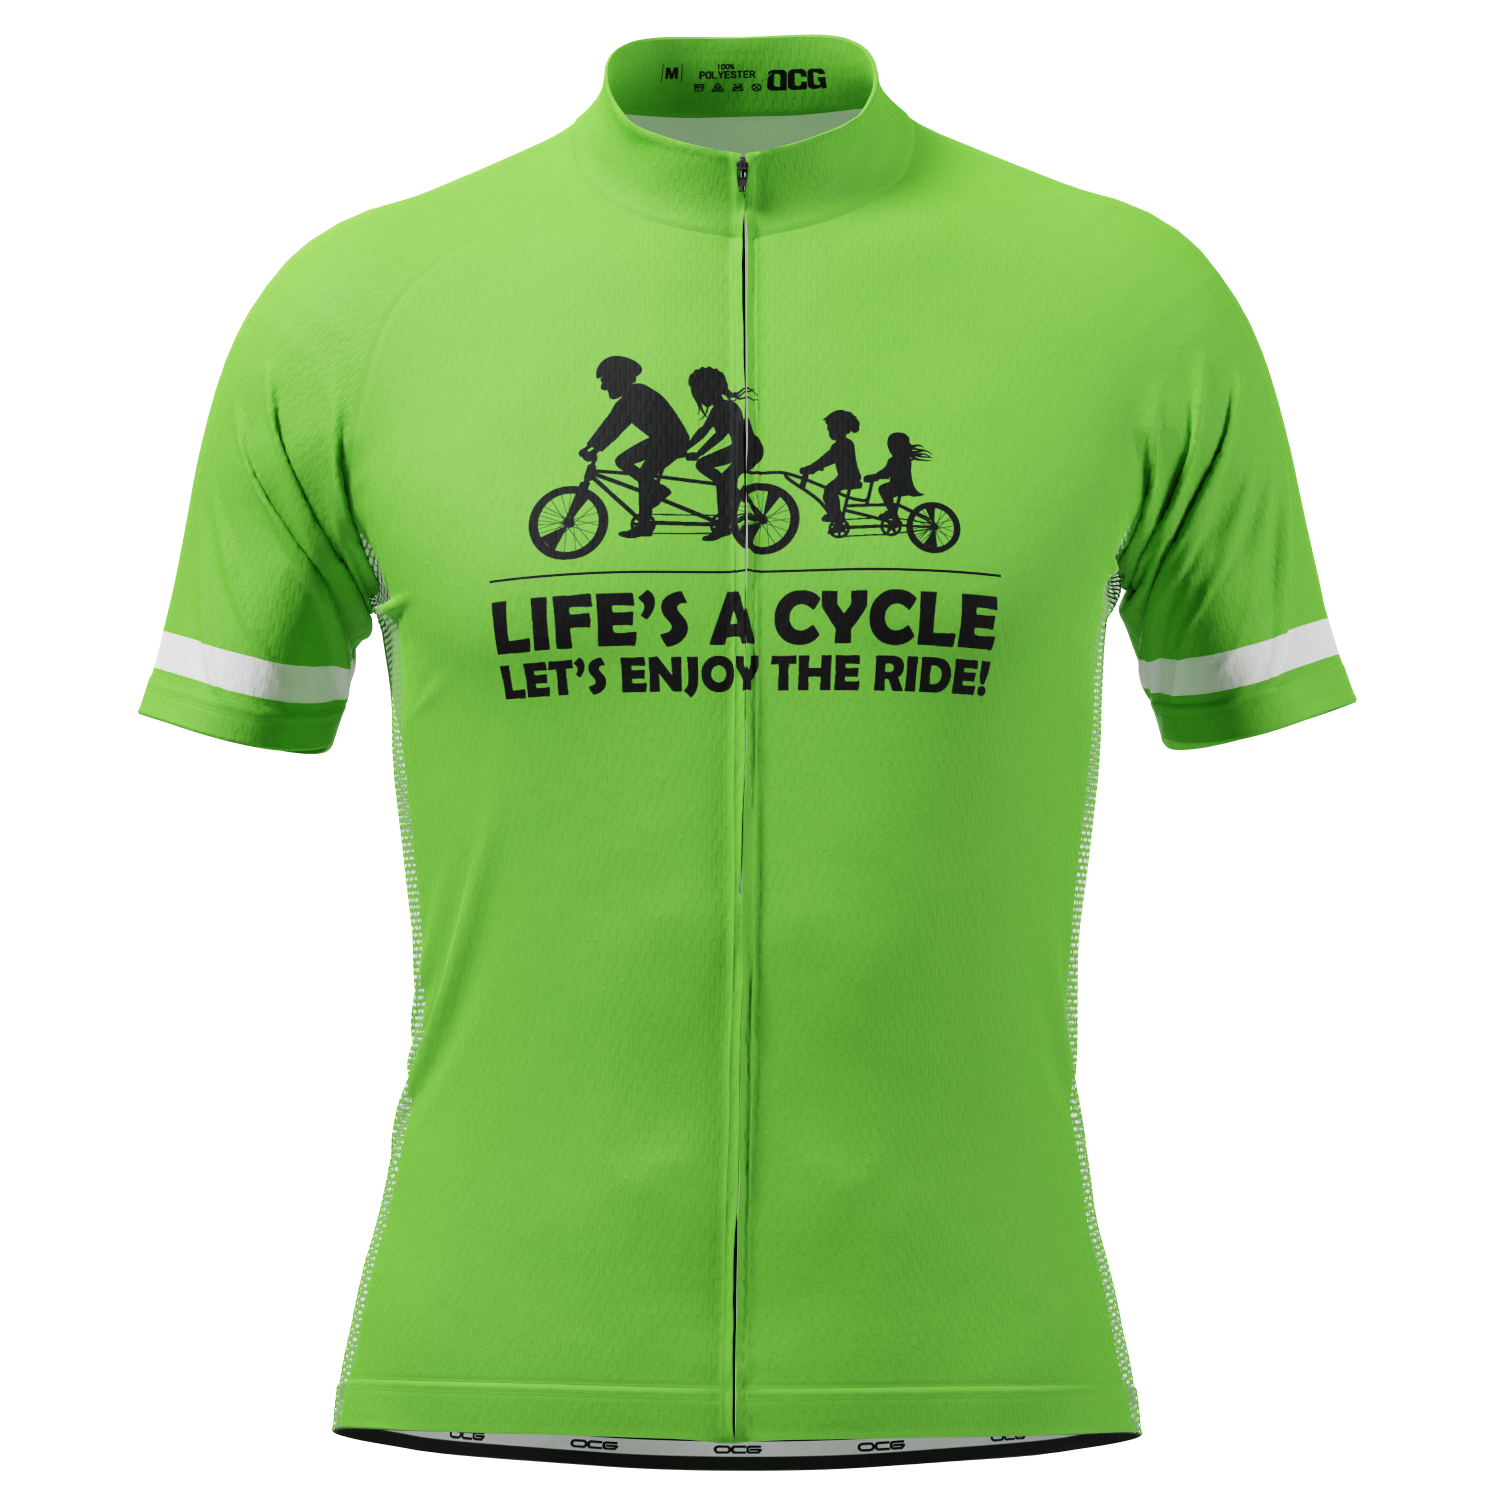 Men's Life's a Cycle, Let's Enjoy The Ride! Short Sleeve Cycling Jersey